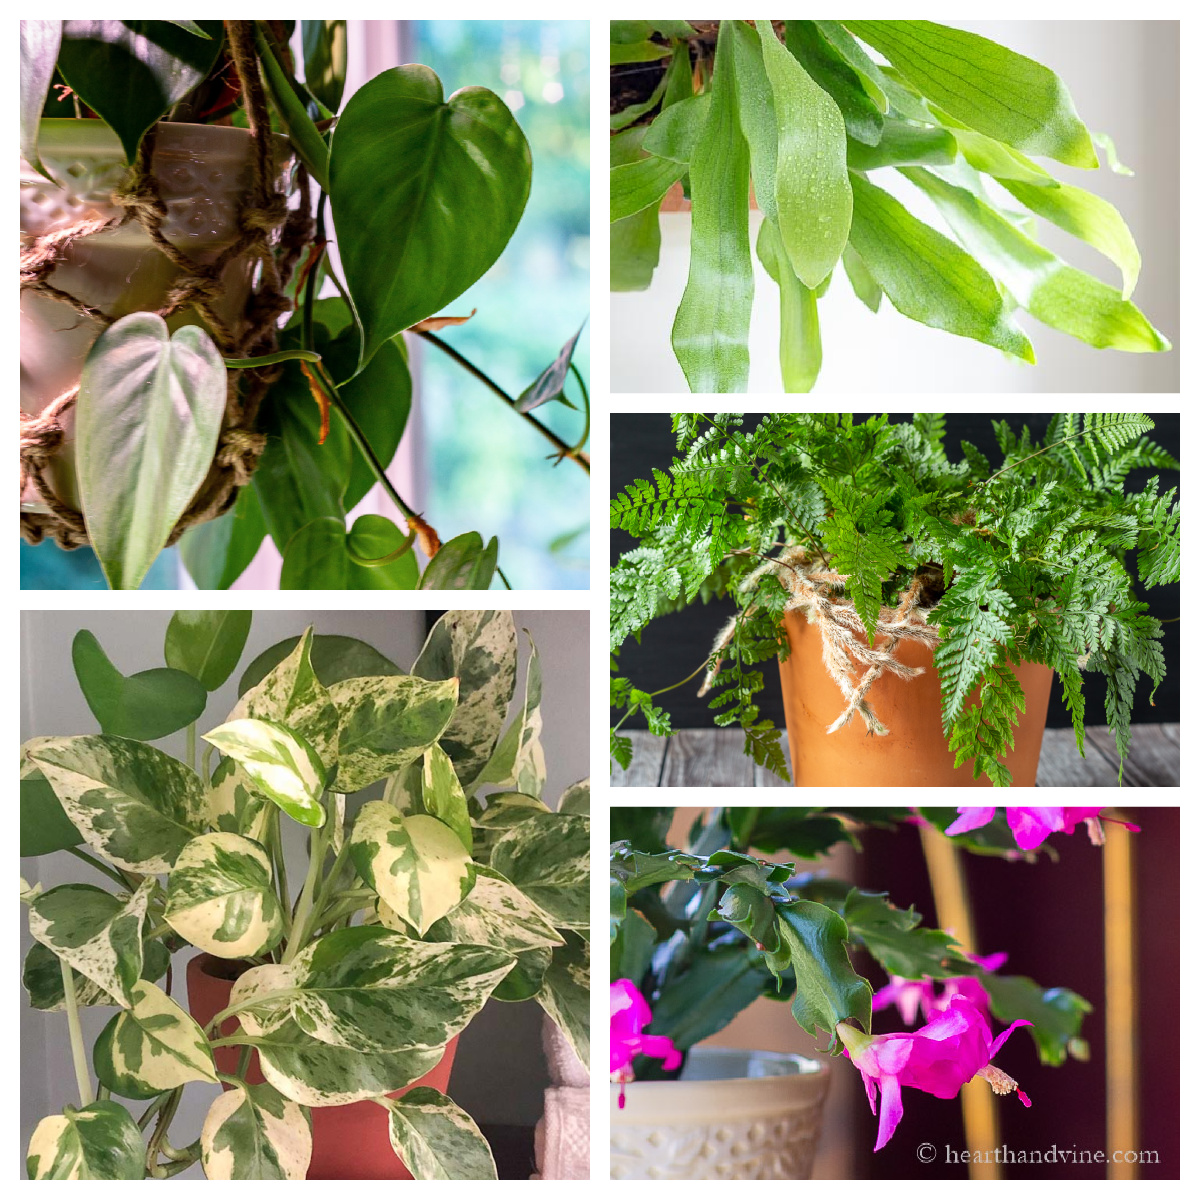 Christmas cactus, rabbit's foot fern, staghorn fern, pothos, and philodendron plants